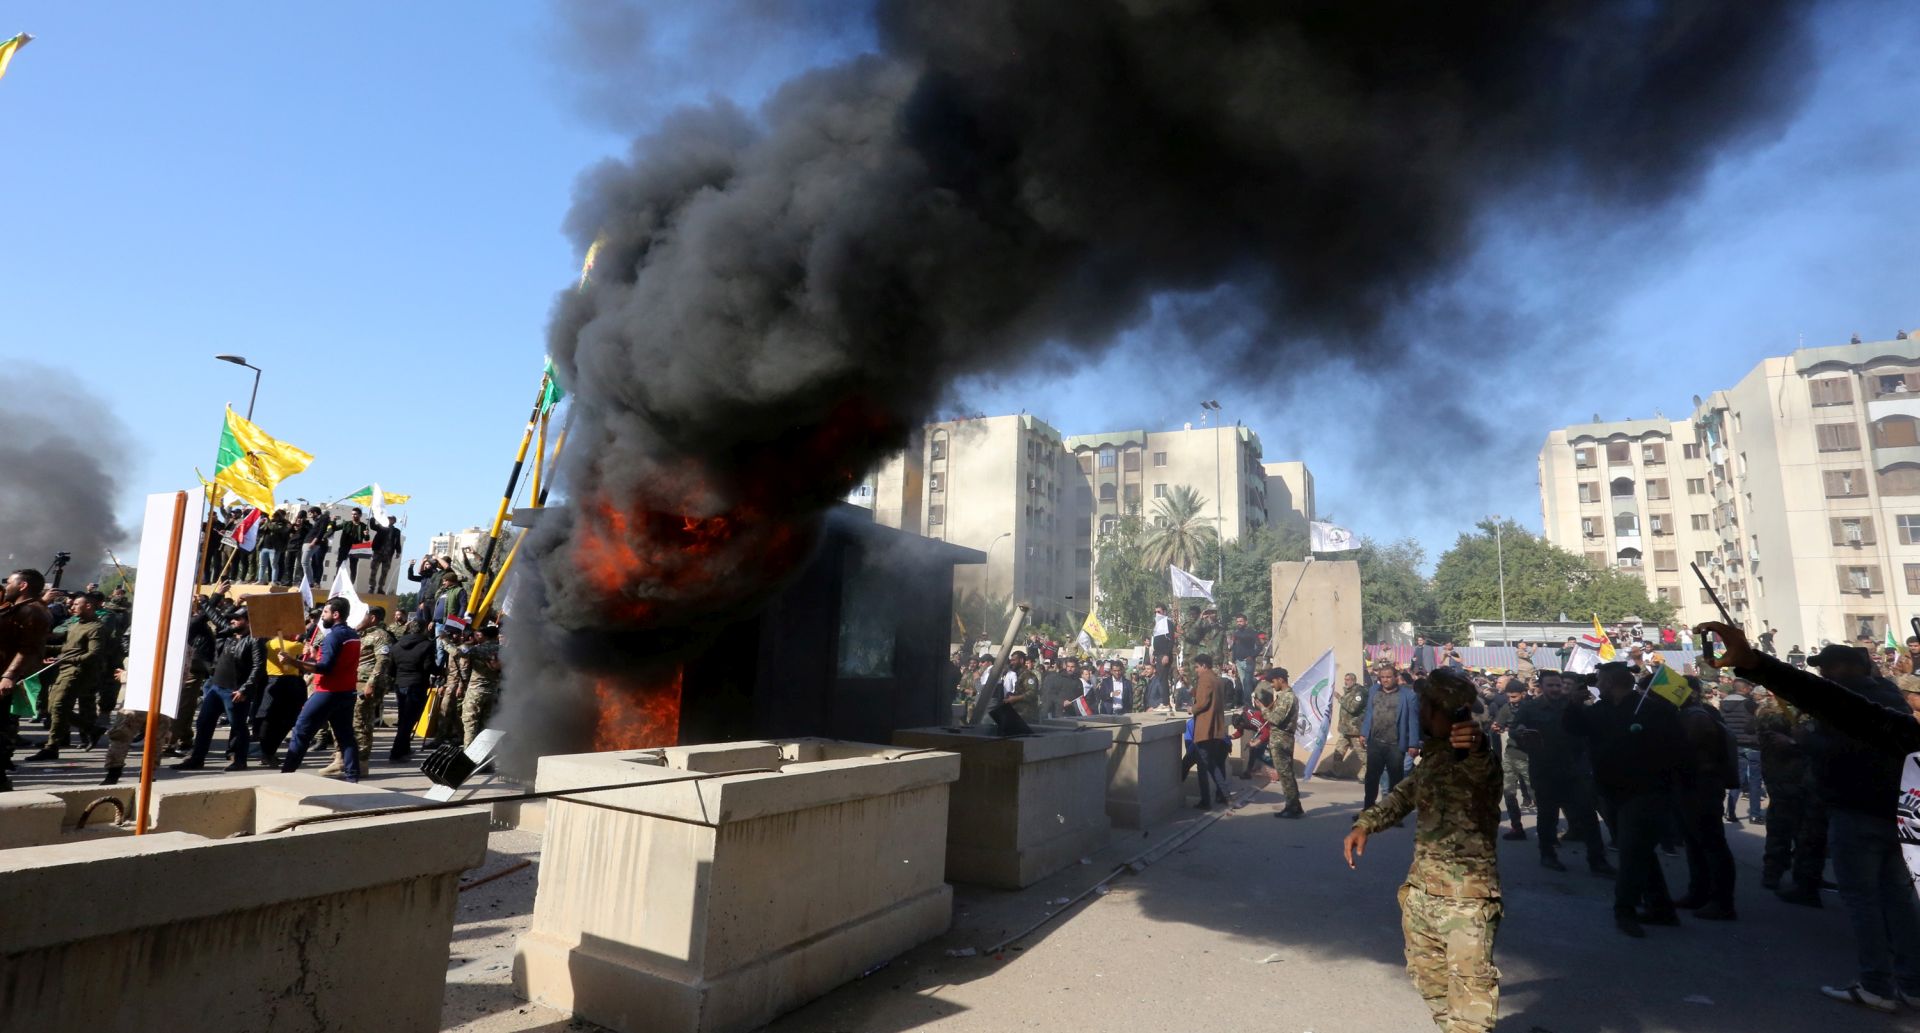 epa08096524 Members of Iraqi Shiite 'Popular Mobilization Forces' armed group and their supporters attack the US Embassy as as smoke rises from its entrance in Baghdad, Iraq, 31 December 2019. According to media reports, the US ambassador and other members of the staff were evacuated as dozens of people broke into the embassy's compound after setting fire to the reception area. The attack at the embassy follows a deadly US airstrike that killed 25 fighters of the Iran-backed militia on 29 December.  EPA/AHMED JALIL